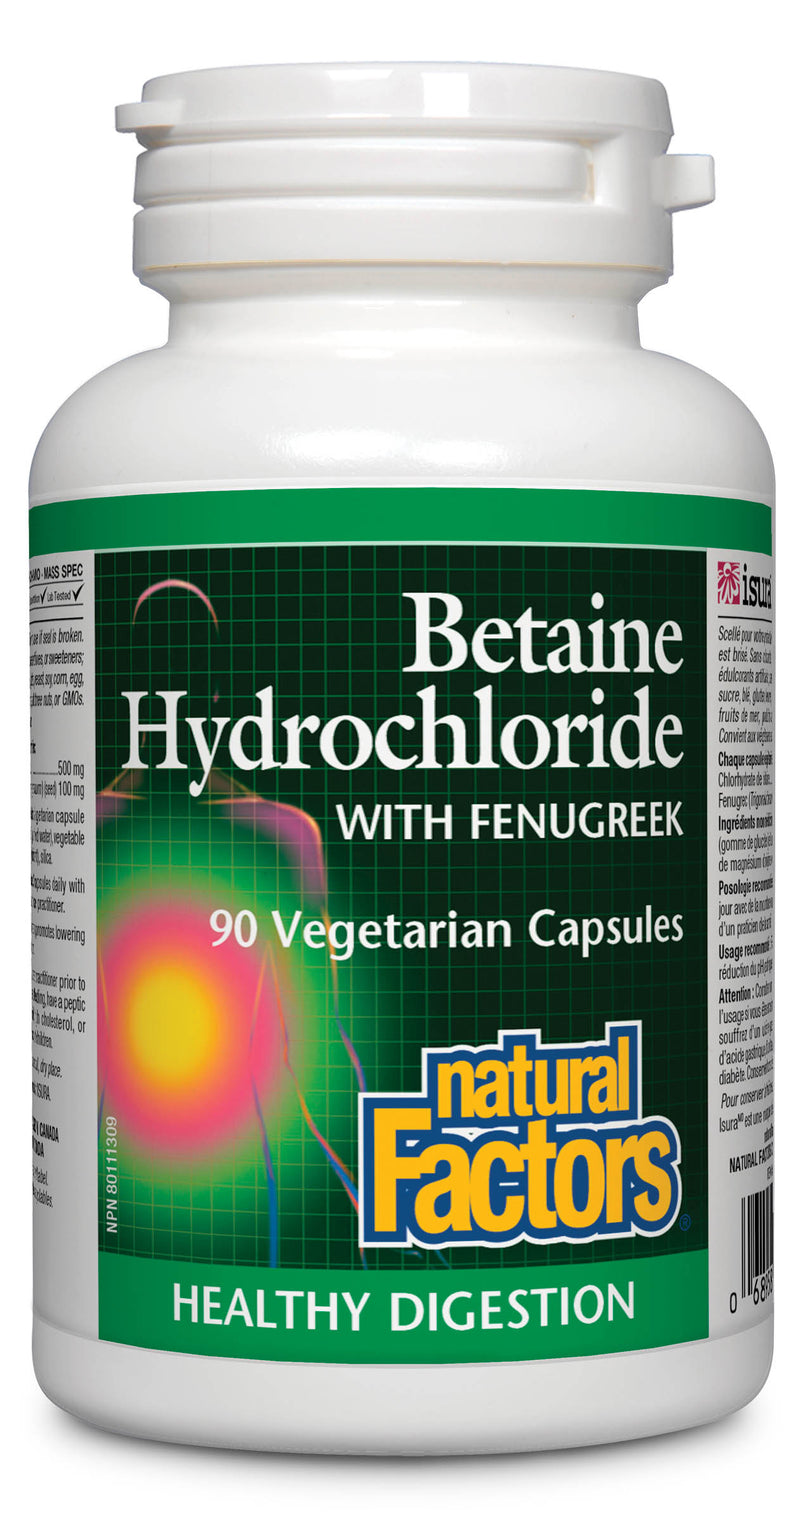 Natural Factors Betaine Hydrochloride 90 capsules